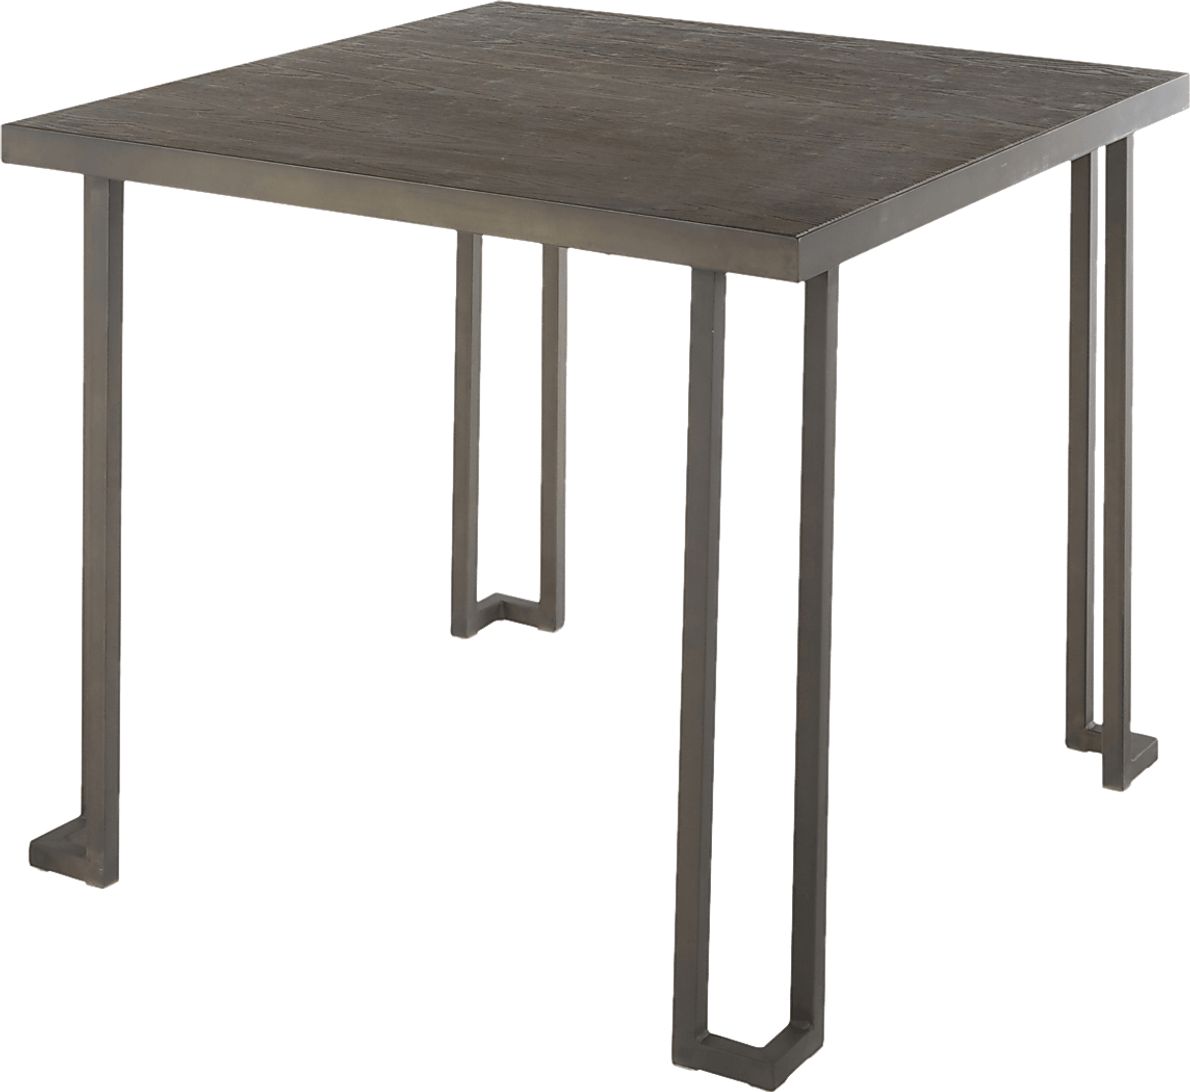 Meadowvale Espresso Dining Table